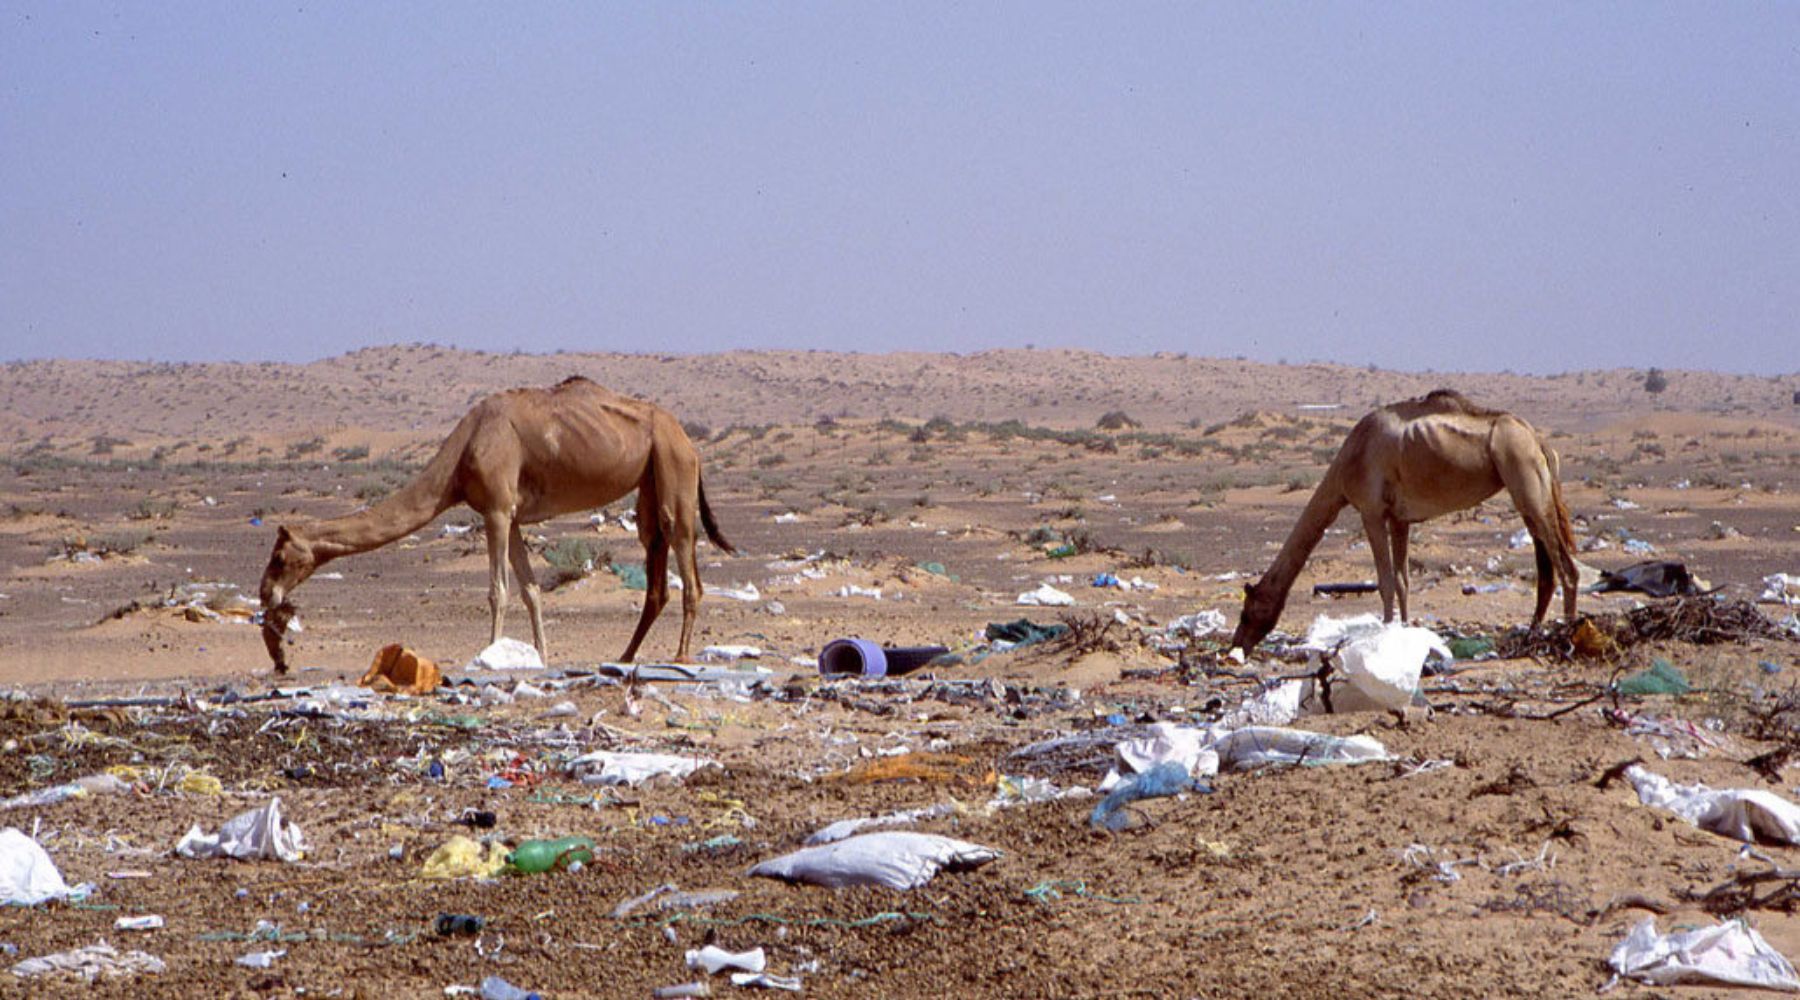 BEEAH's Latest Campaign Raises Awareness on the Impact of Plastic Pollution on Camels